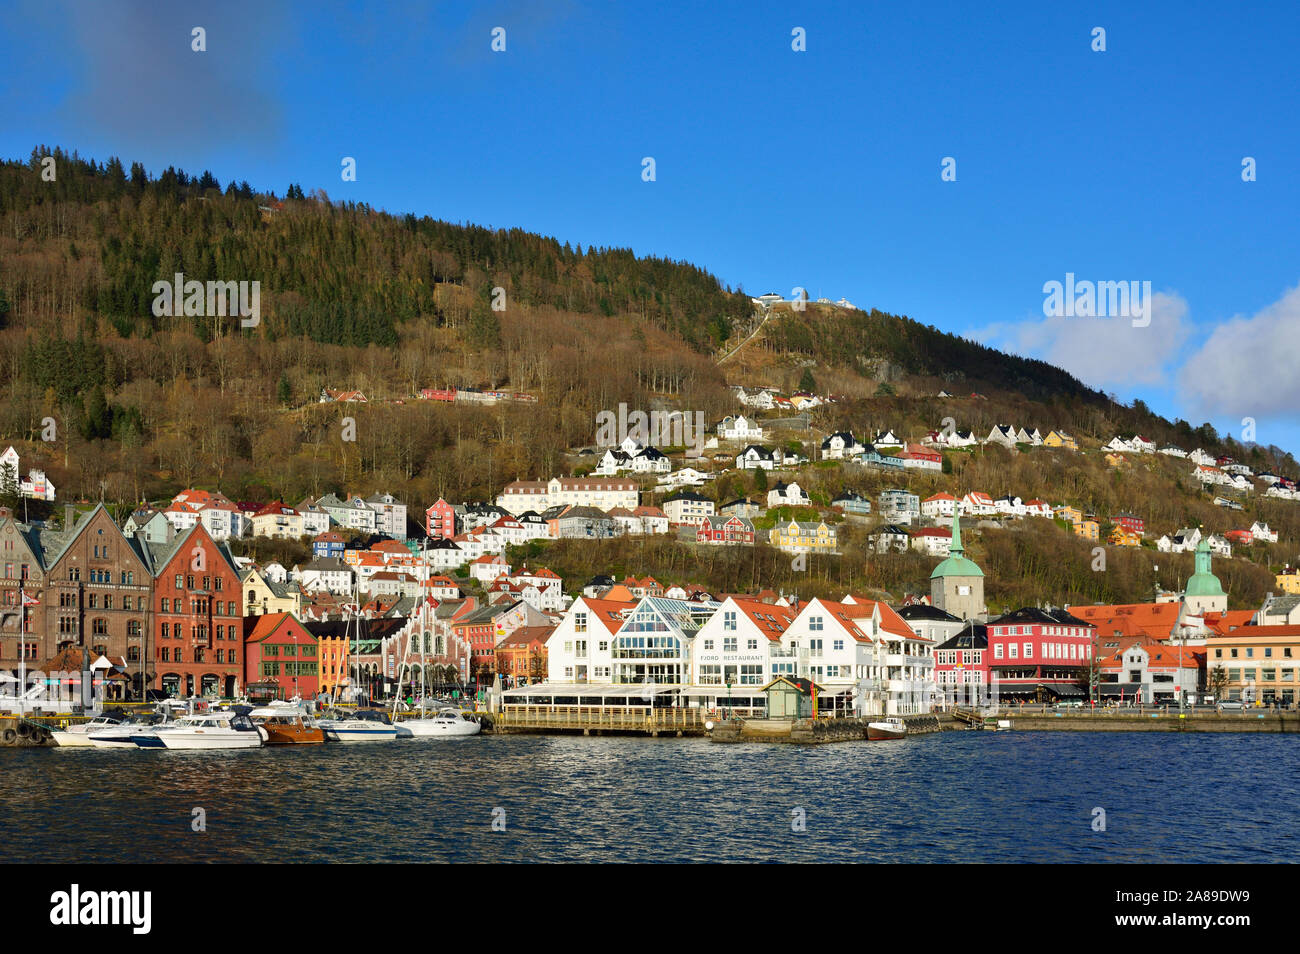 The Bryggen District, a former counter of the Hanseatic League and nowadays a UNESCO World Heritage Site. Bergen, Norway Stock Photo